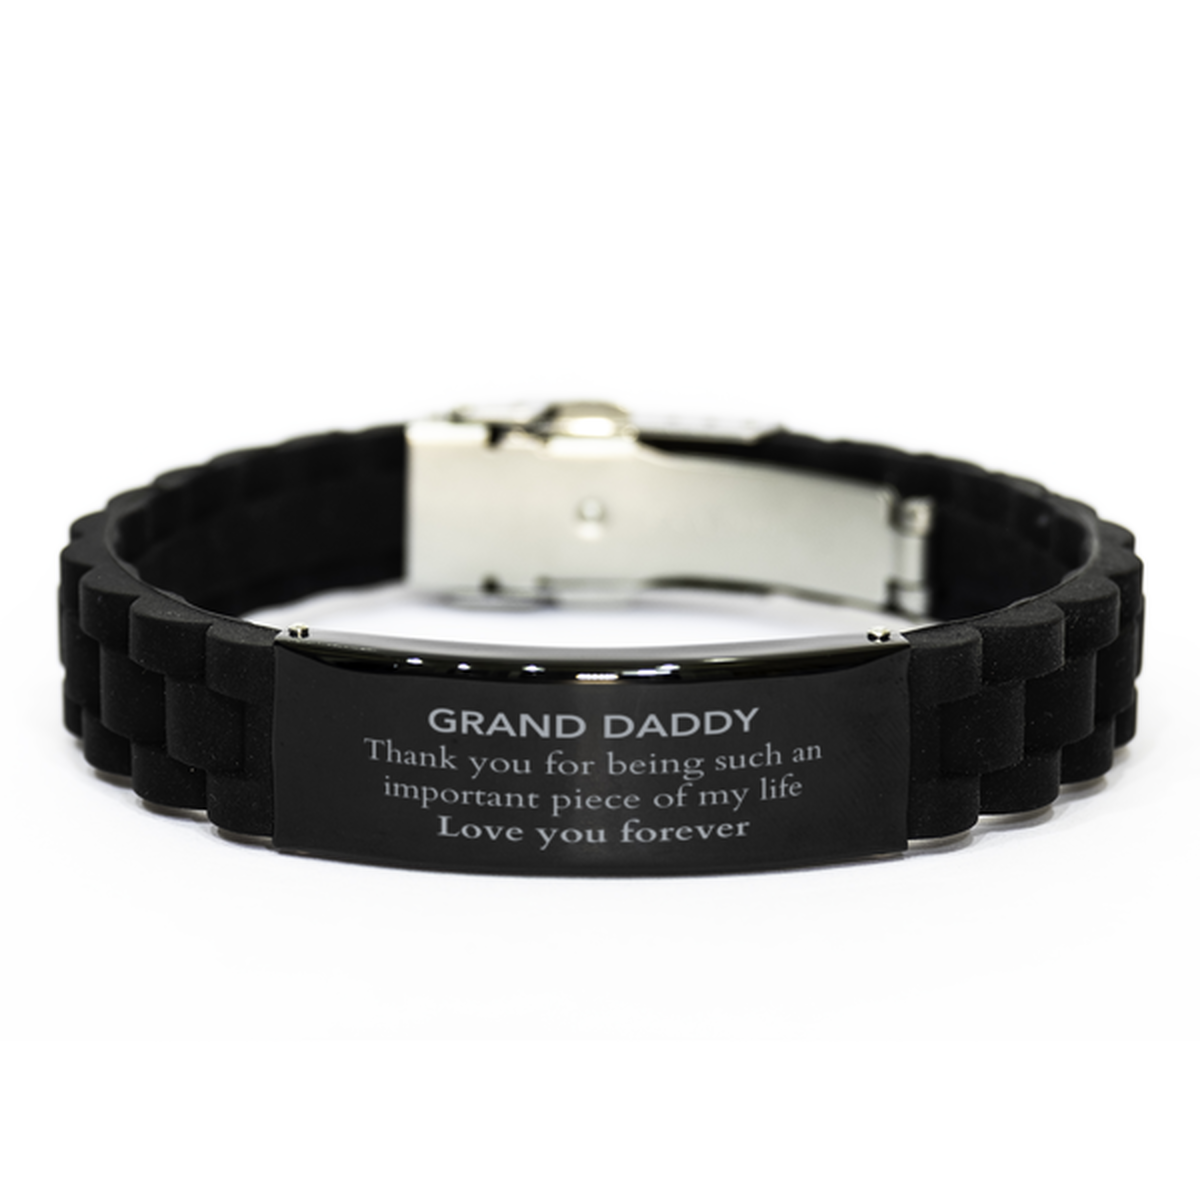 Appropriate Grand Daddy Black Glidelock Clasp Bracelet Epic Birthday Gifts for Grand Daddy Thank you for being such an important piece of my life Grand Daddy Christmas Mothers Fathers Day